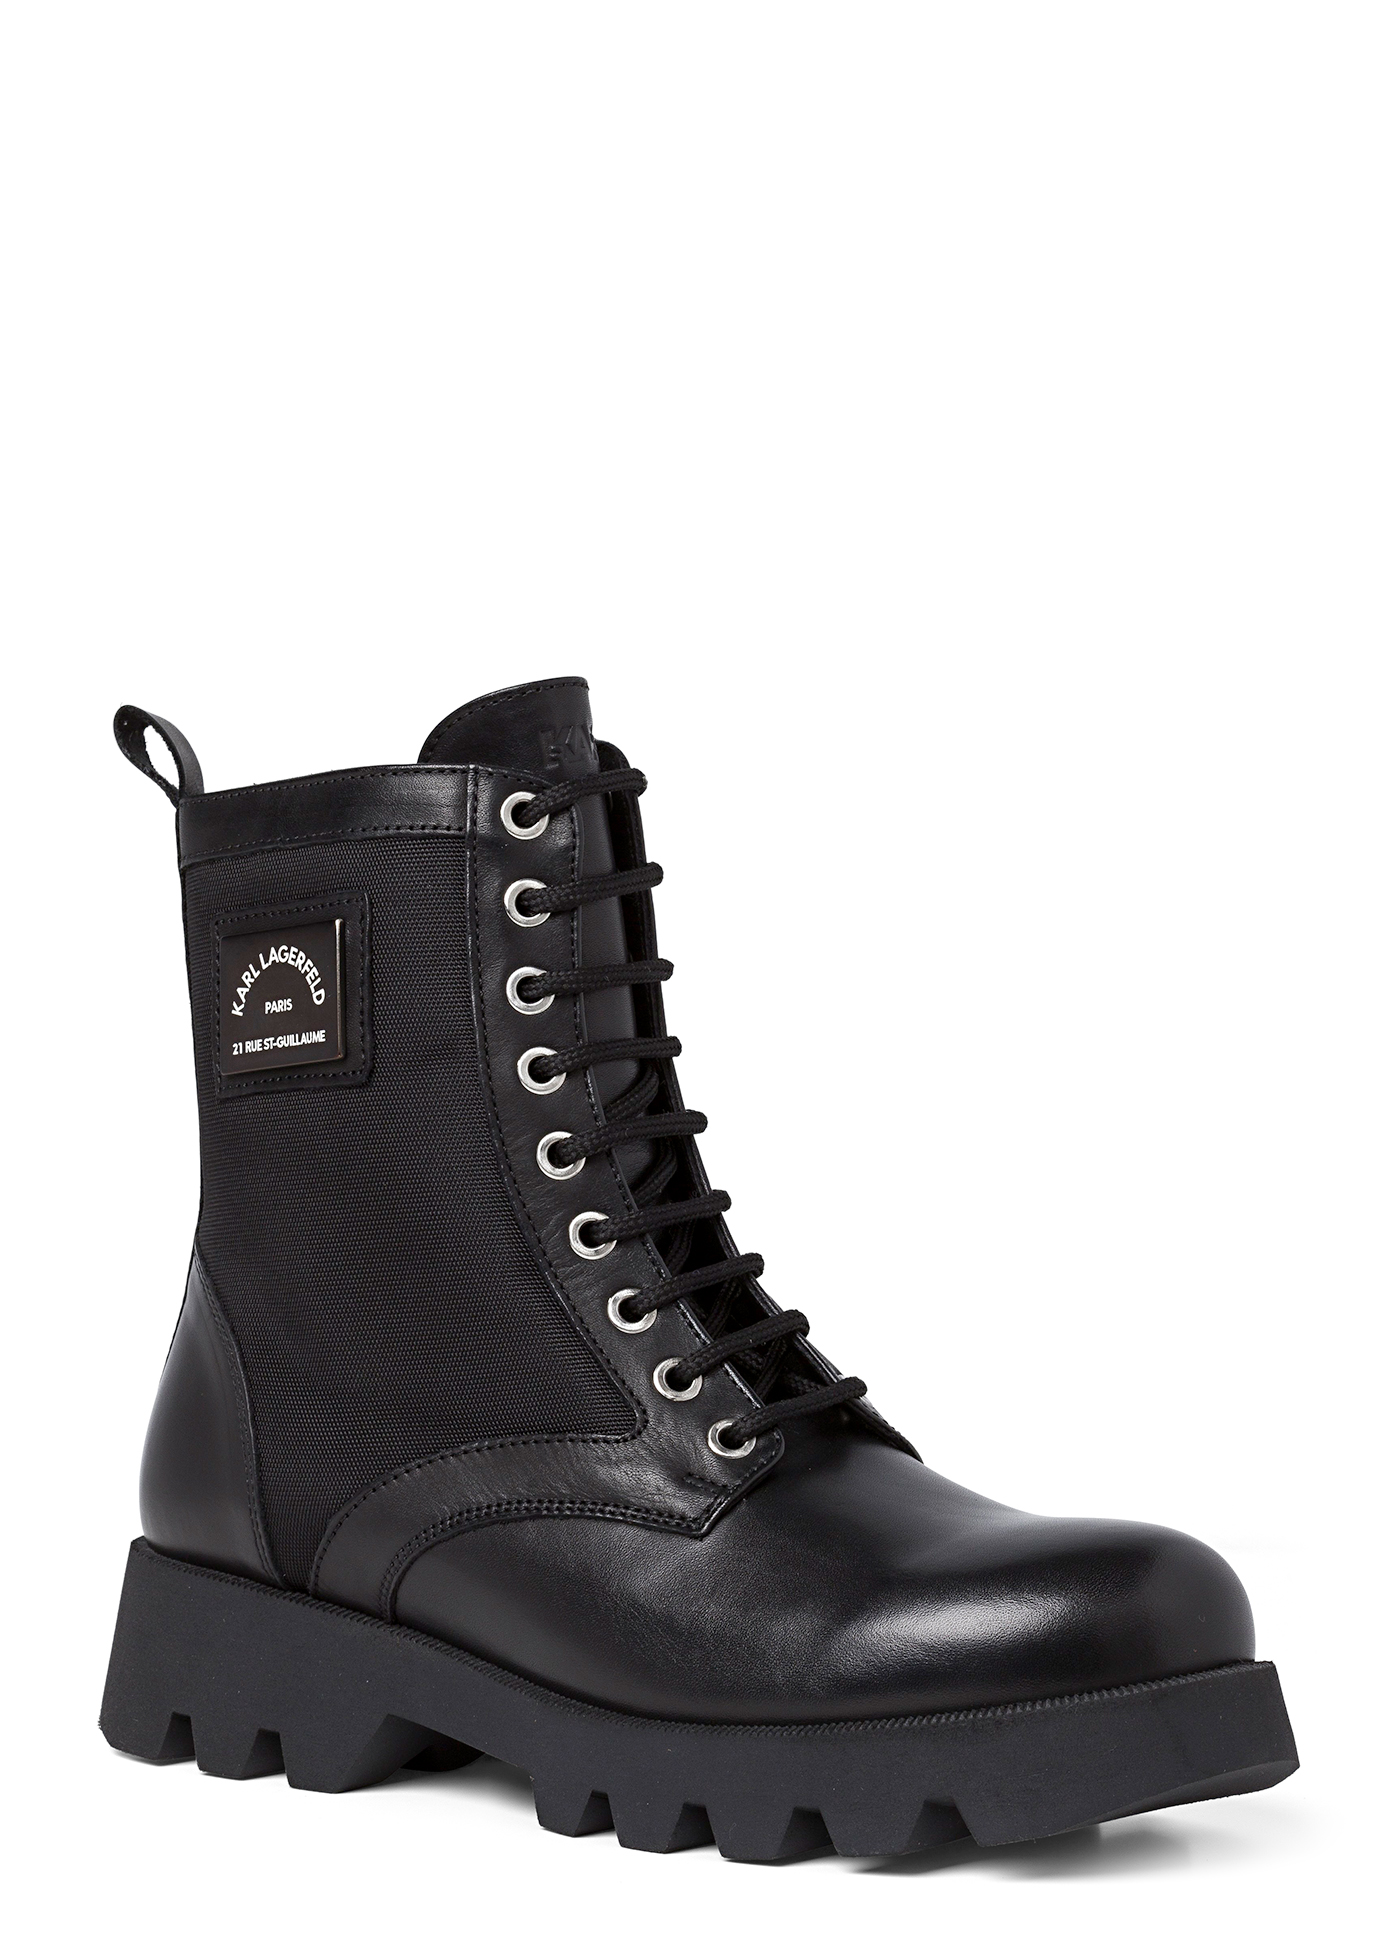 TERRA FIRMA Hi Lace Boot image number 1